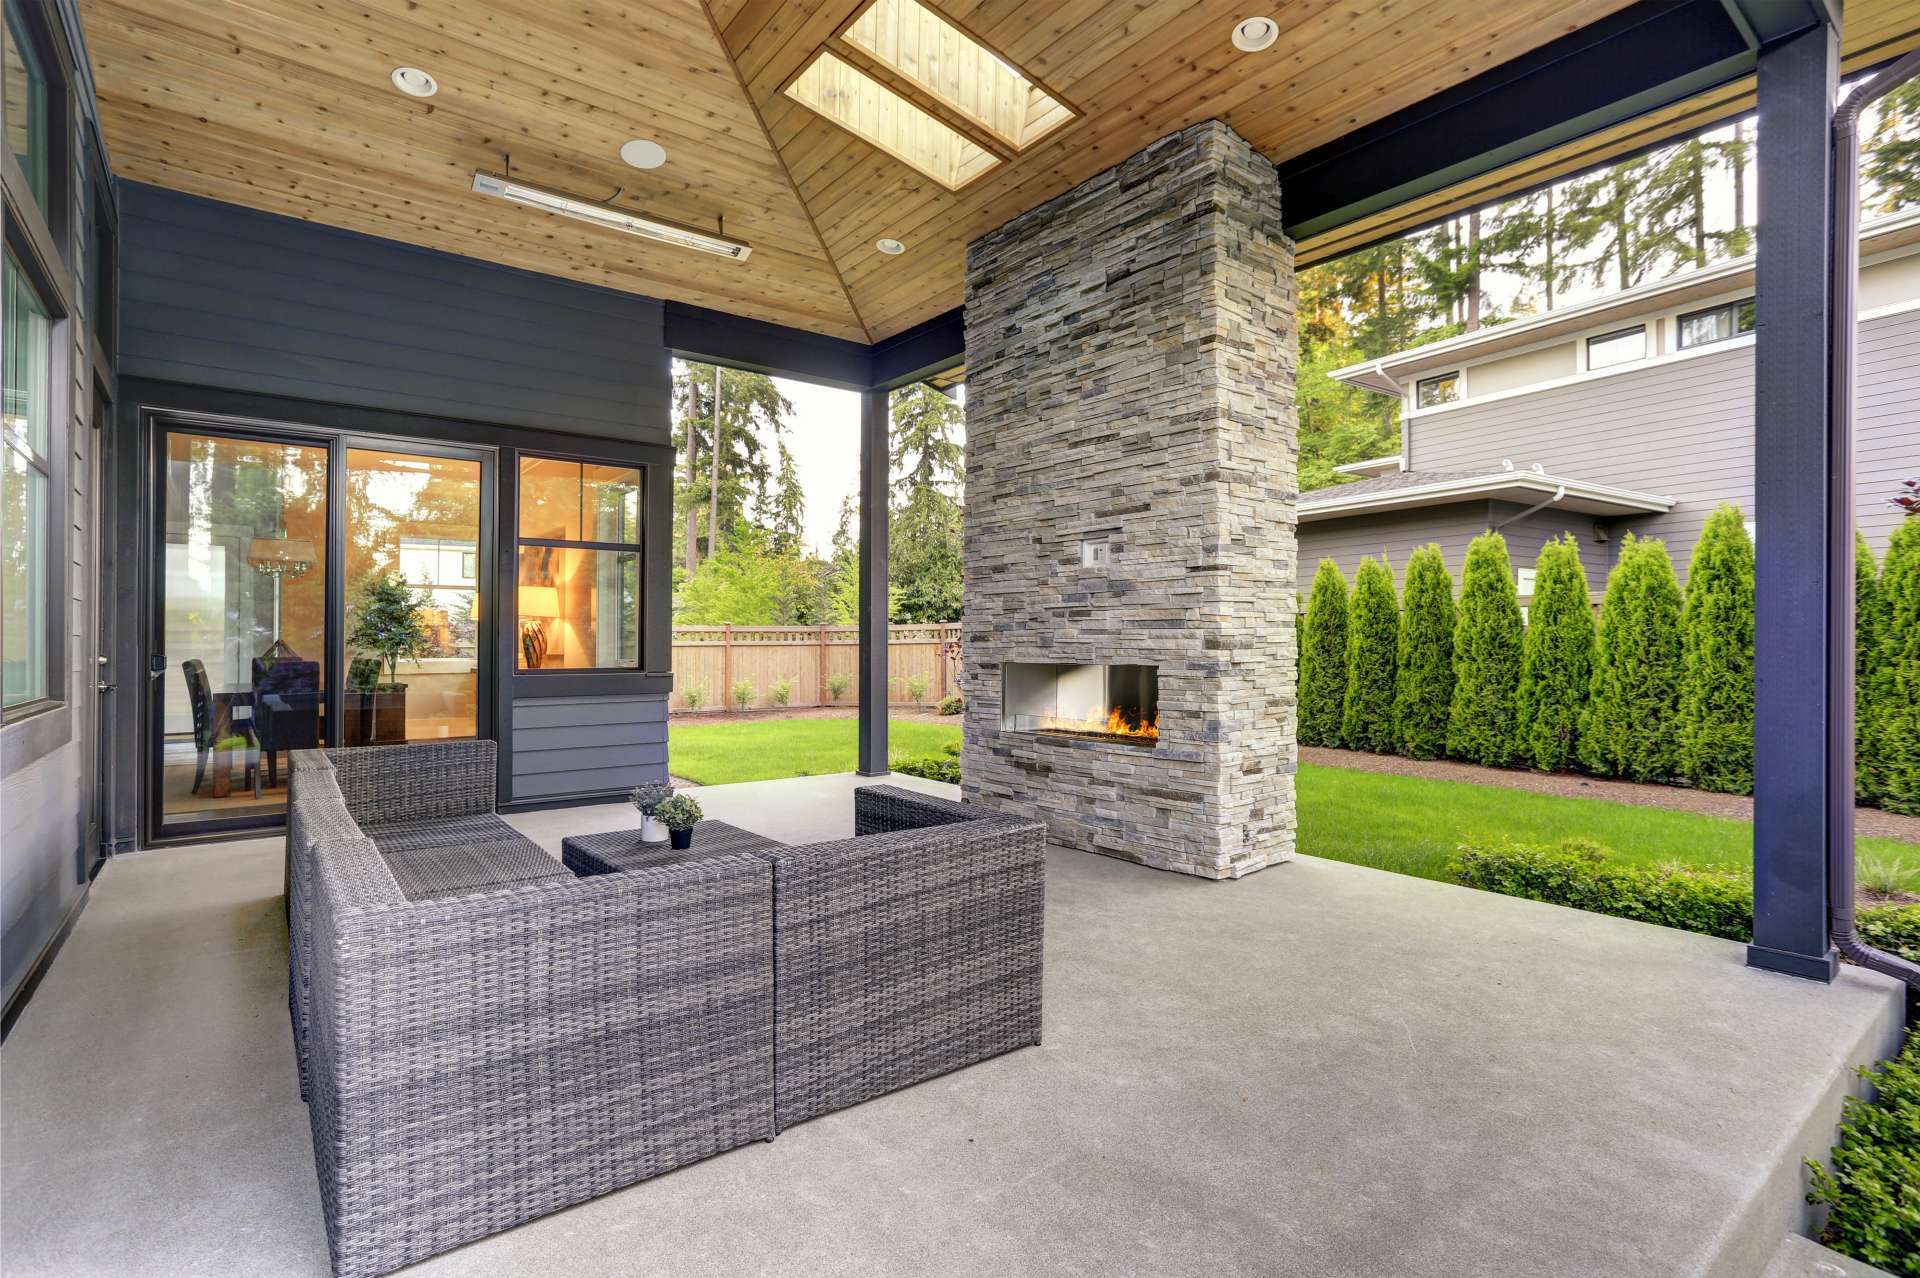 Adding a Concrete Patio Adds Value to Your Home